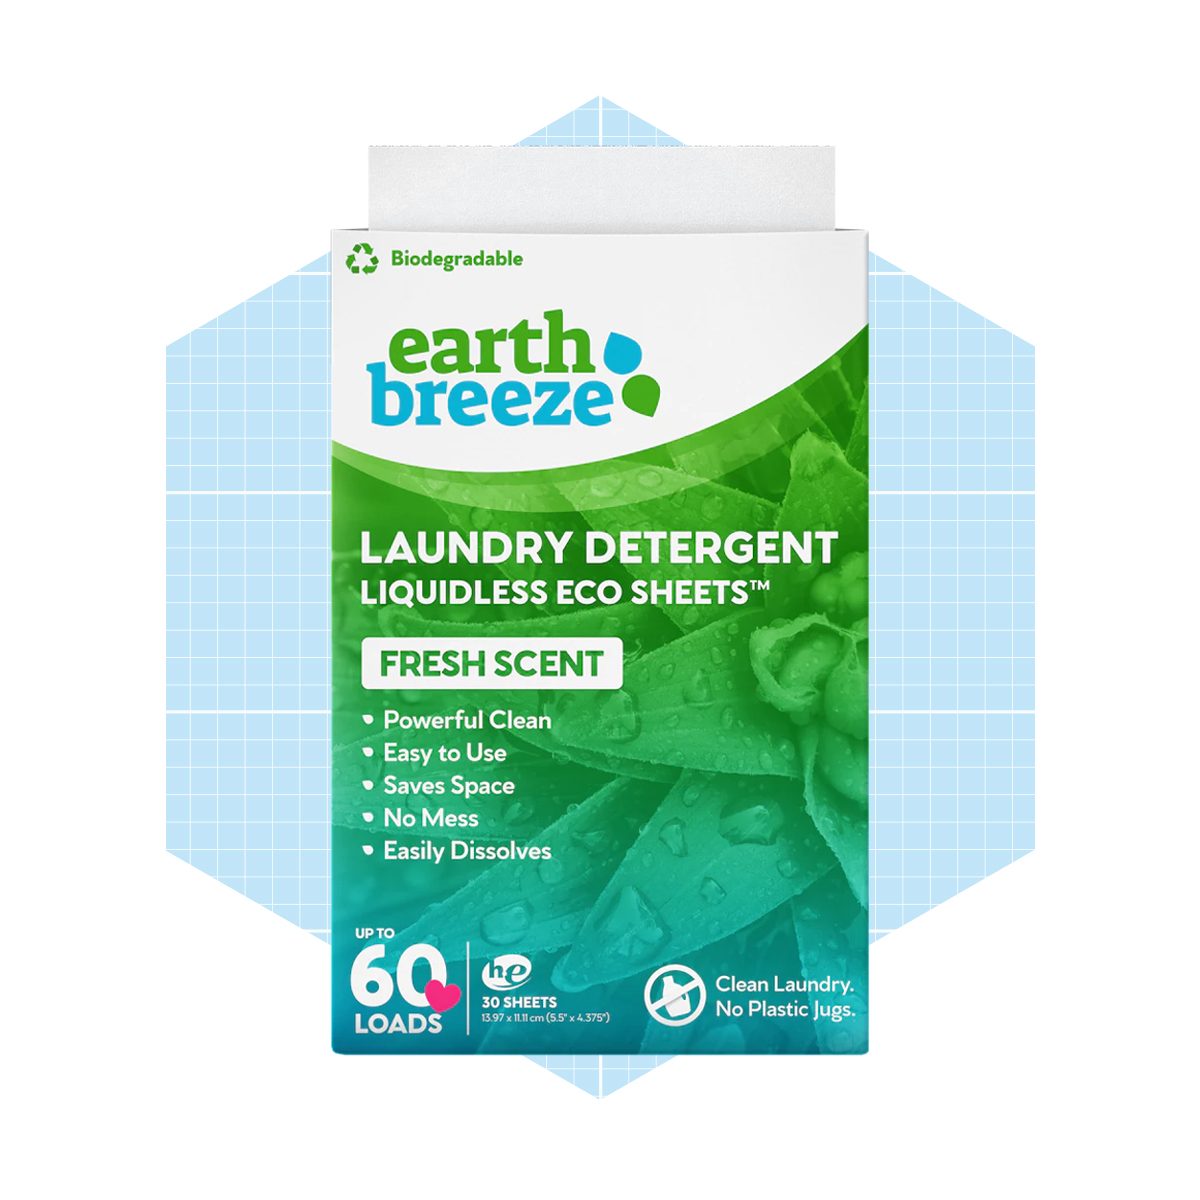 Laundry Detergent Sheets Make Everything Smell Fresh